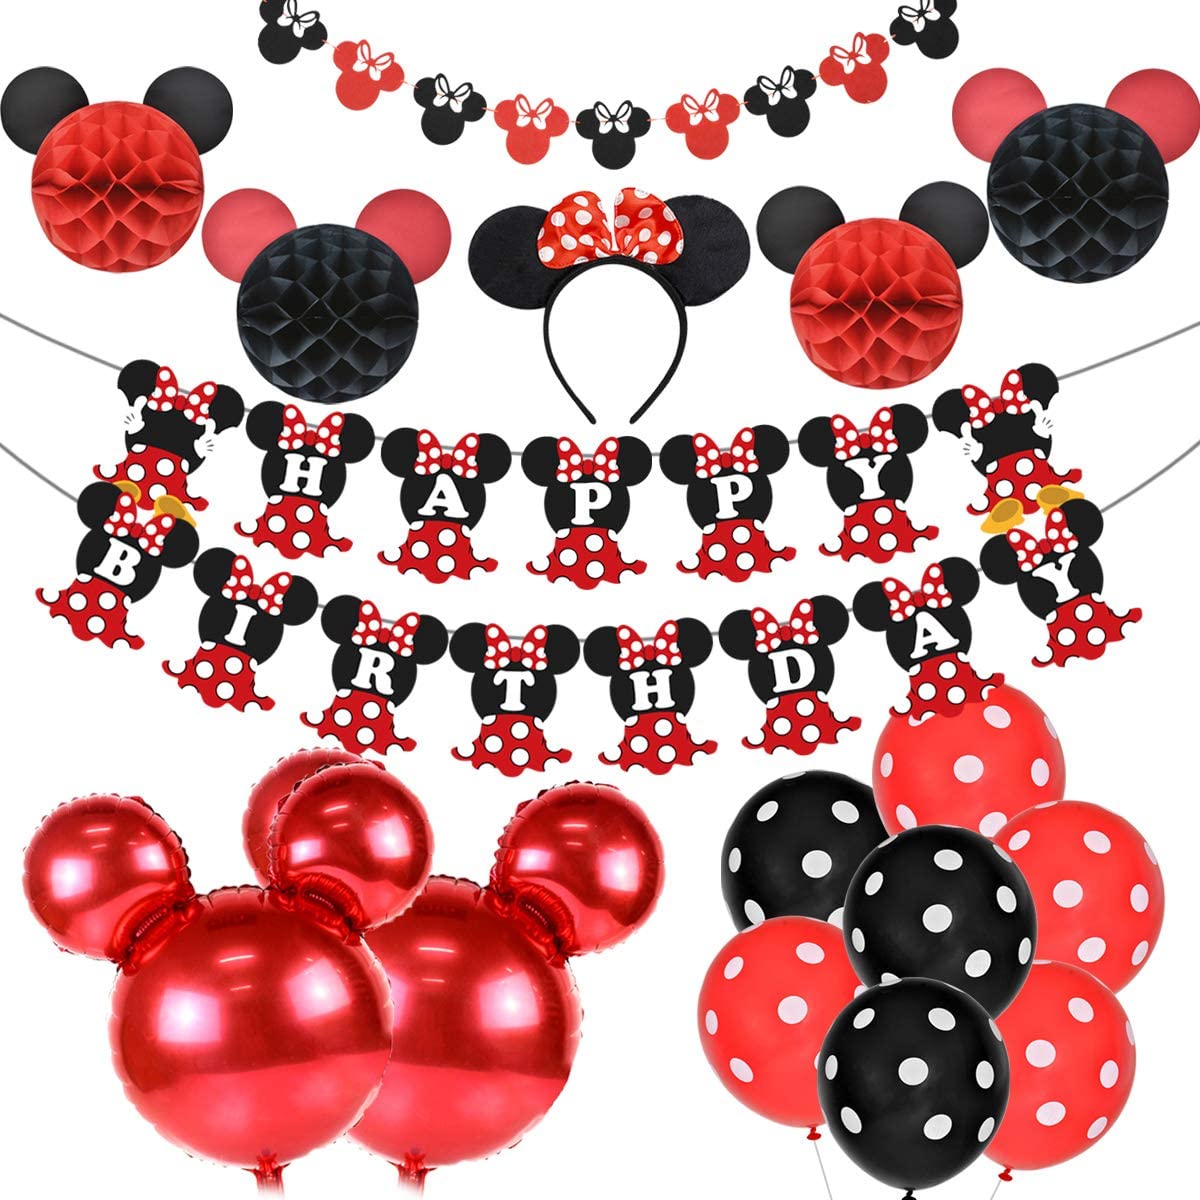 and Polka Dot Balloons Minnie Mouse Birthday Decorations Red and Black for Girls with Happy Birthday Banner Garland Headband 